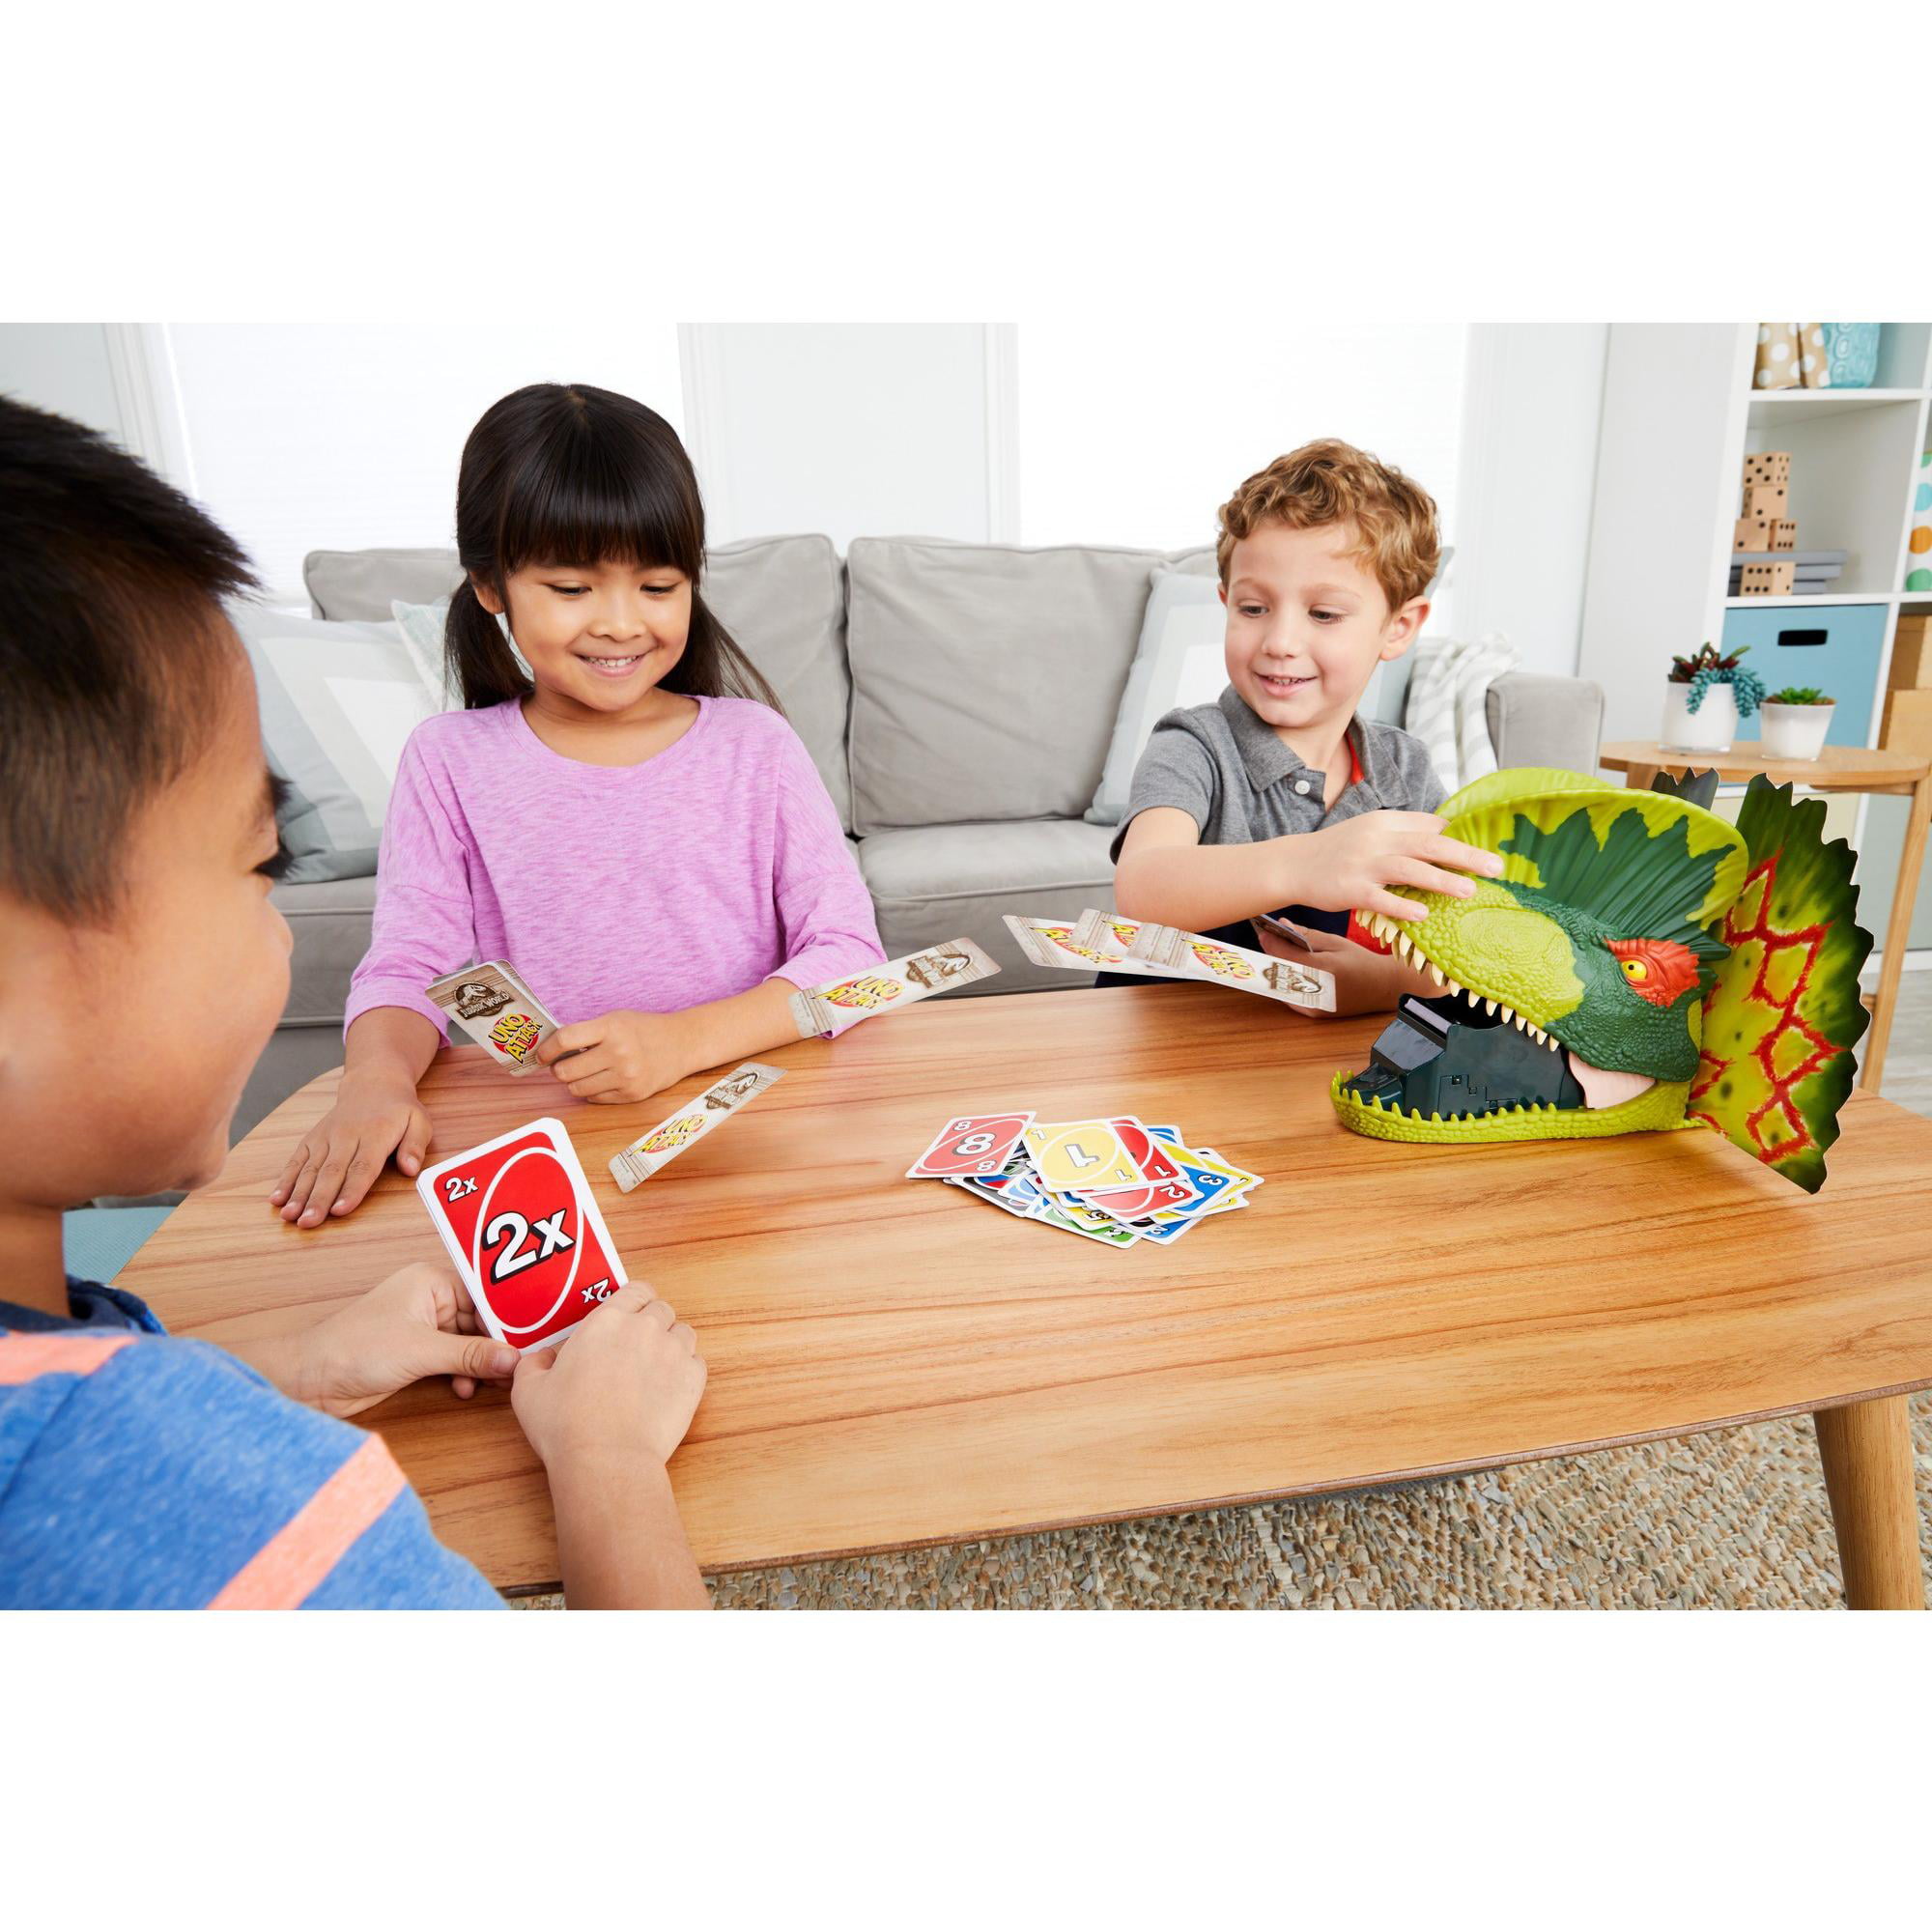 UNO Jurassic World Theme Card Game for 2-10 Players Ages 7Y+ 